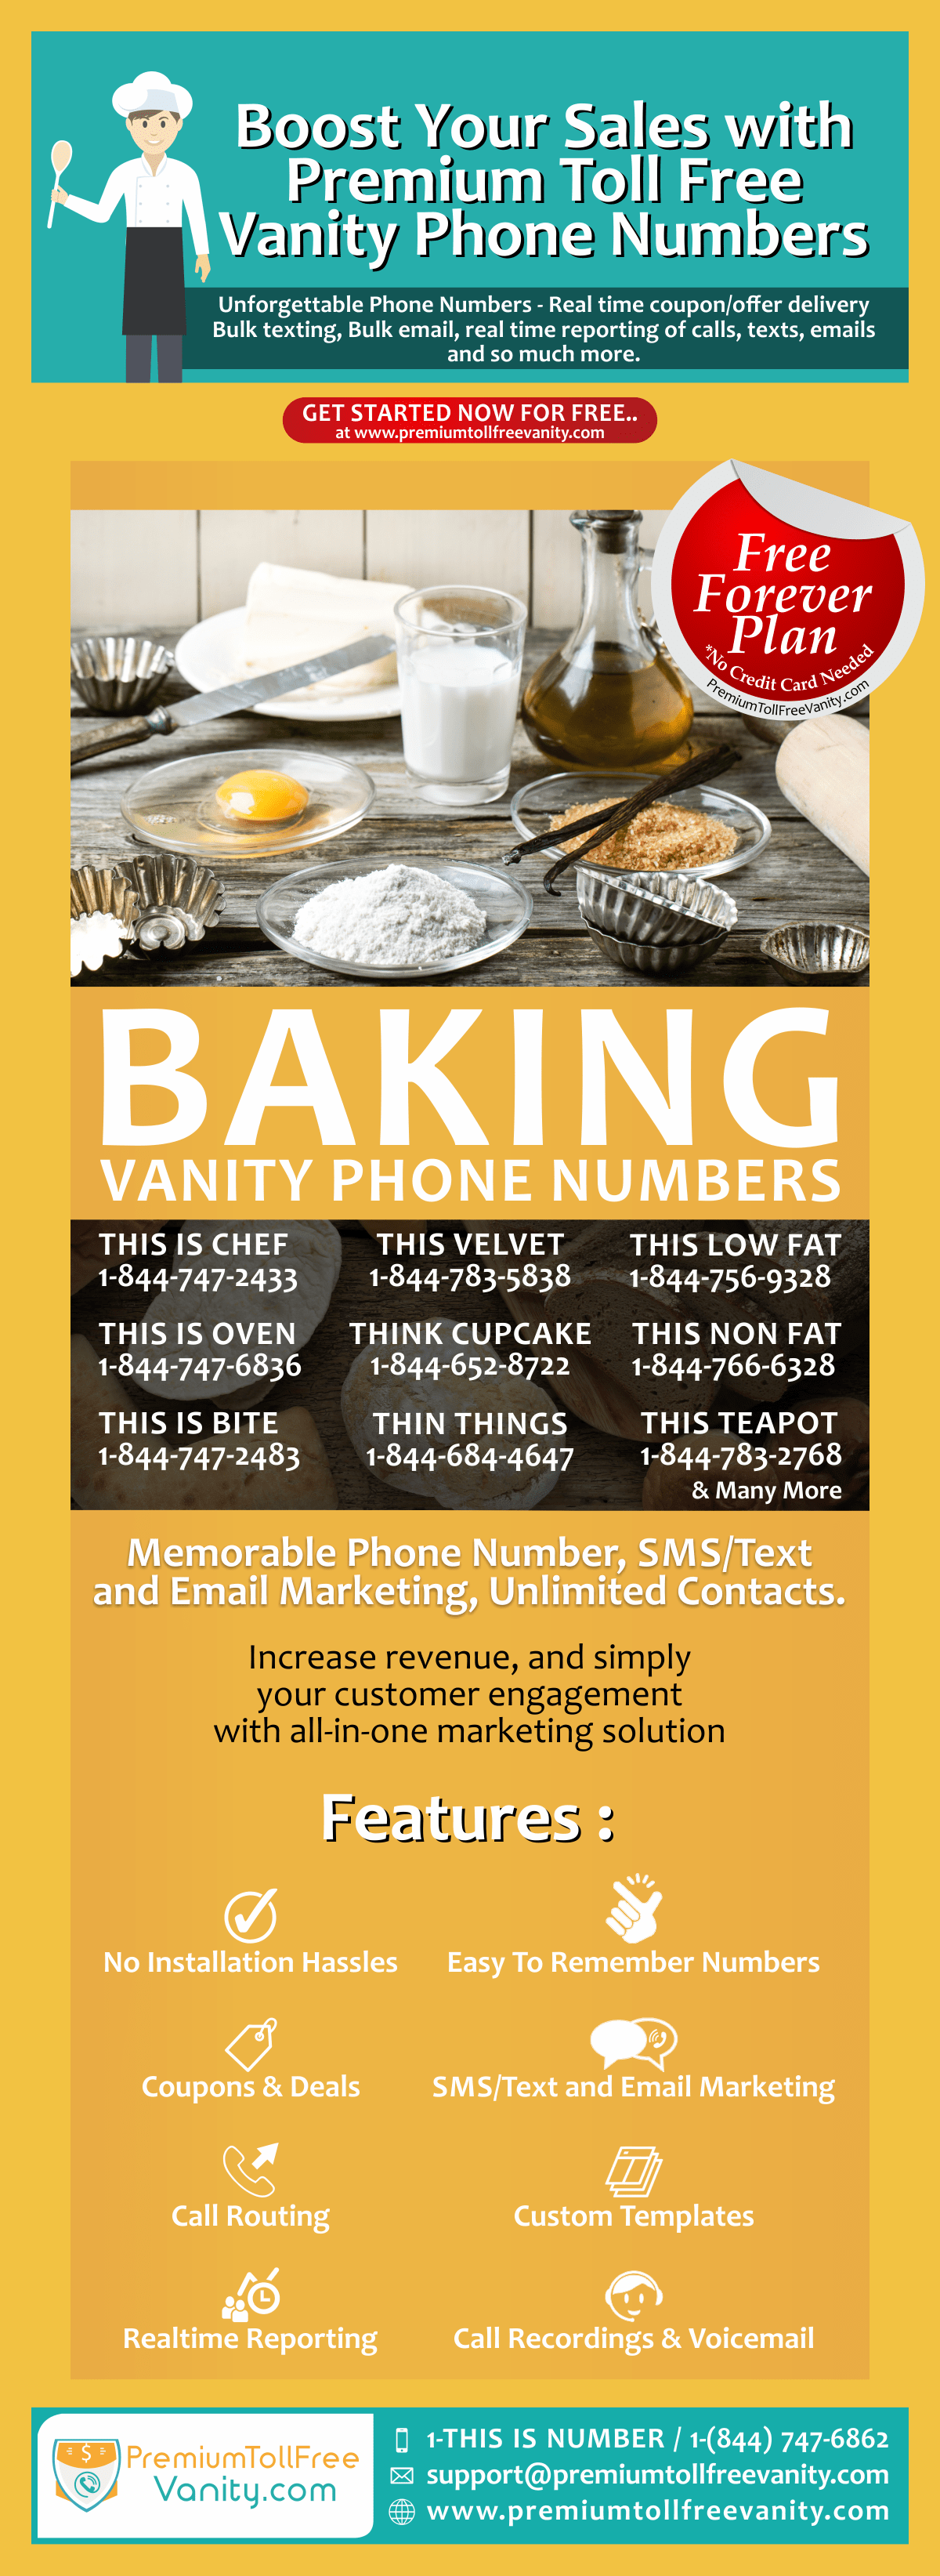 Find and License Premium Toll Free Vanity Phone Numbers for Baking Business with SMS/Text and Email Marketing